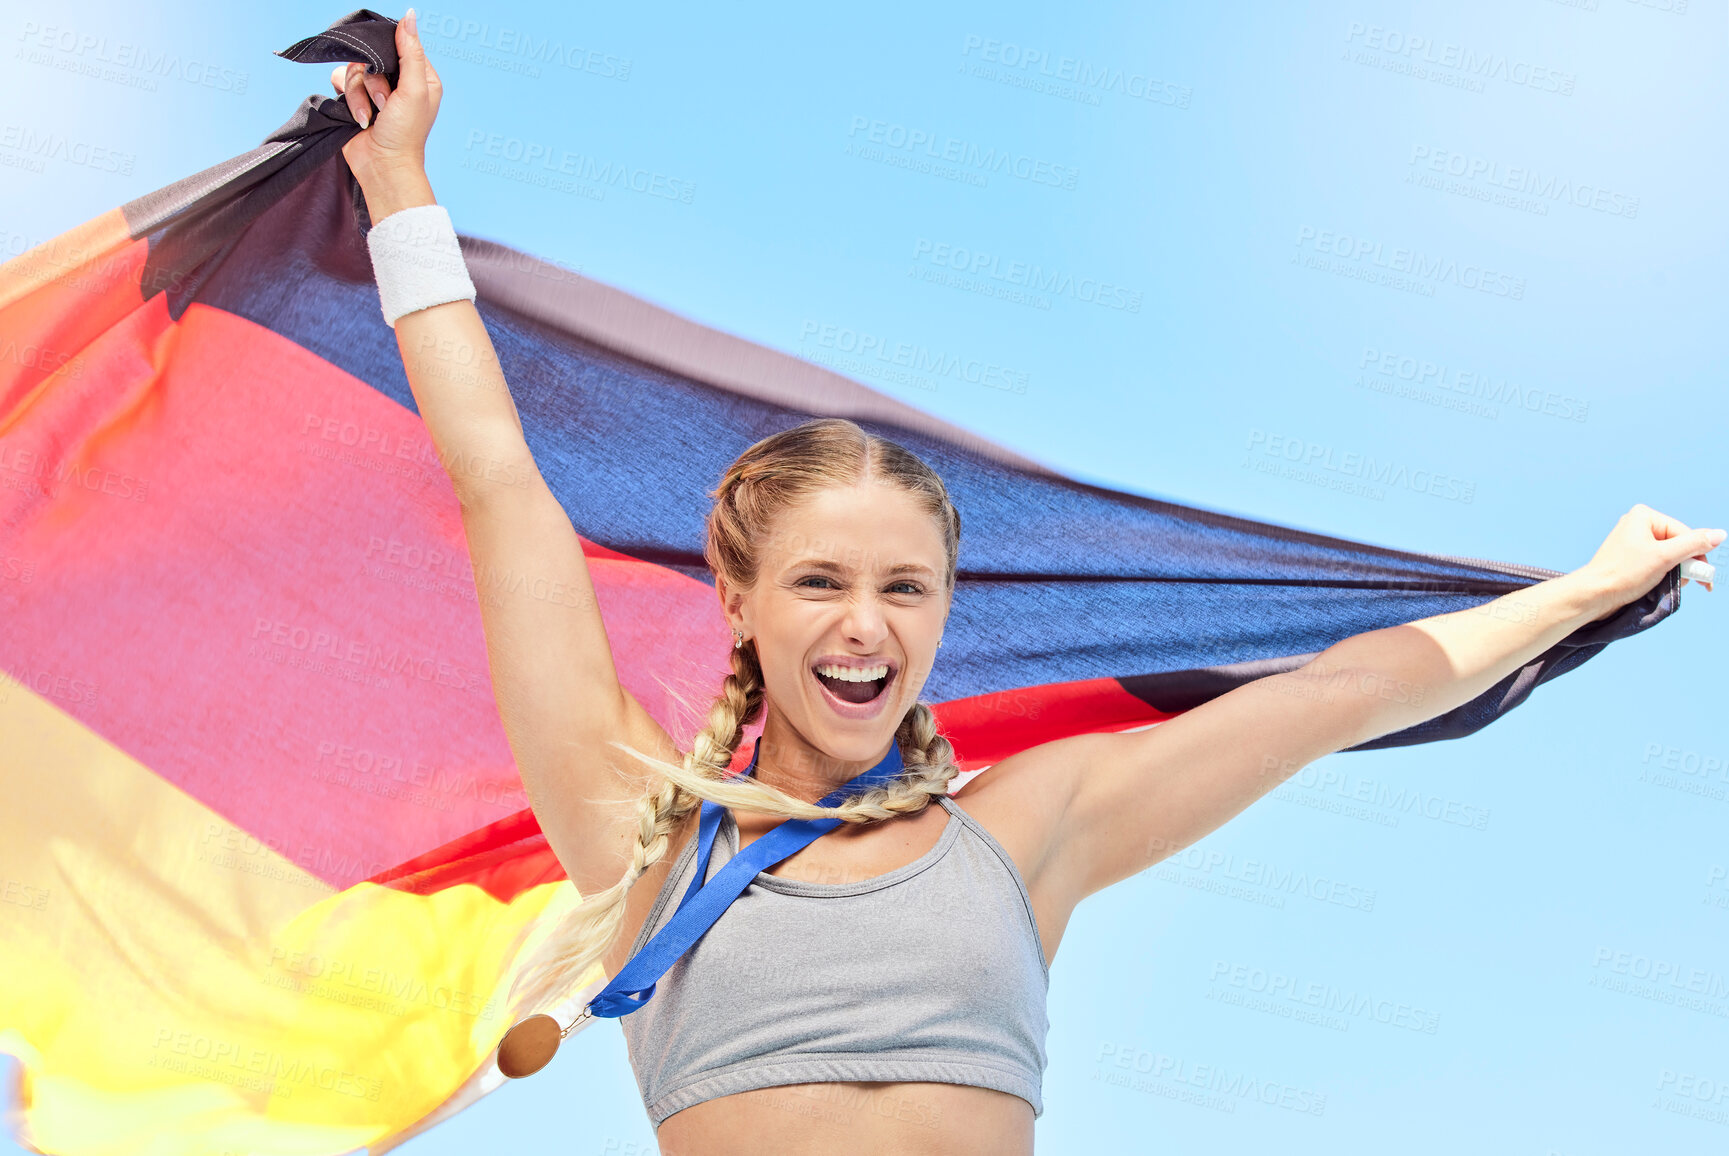 Buy stock photo Portrait of winning athlete cheering, holding German flag after competing in sports. Smiling fit active sporty motivated woman. Celebrating achieving a gold medal in olympic sport with national pride